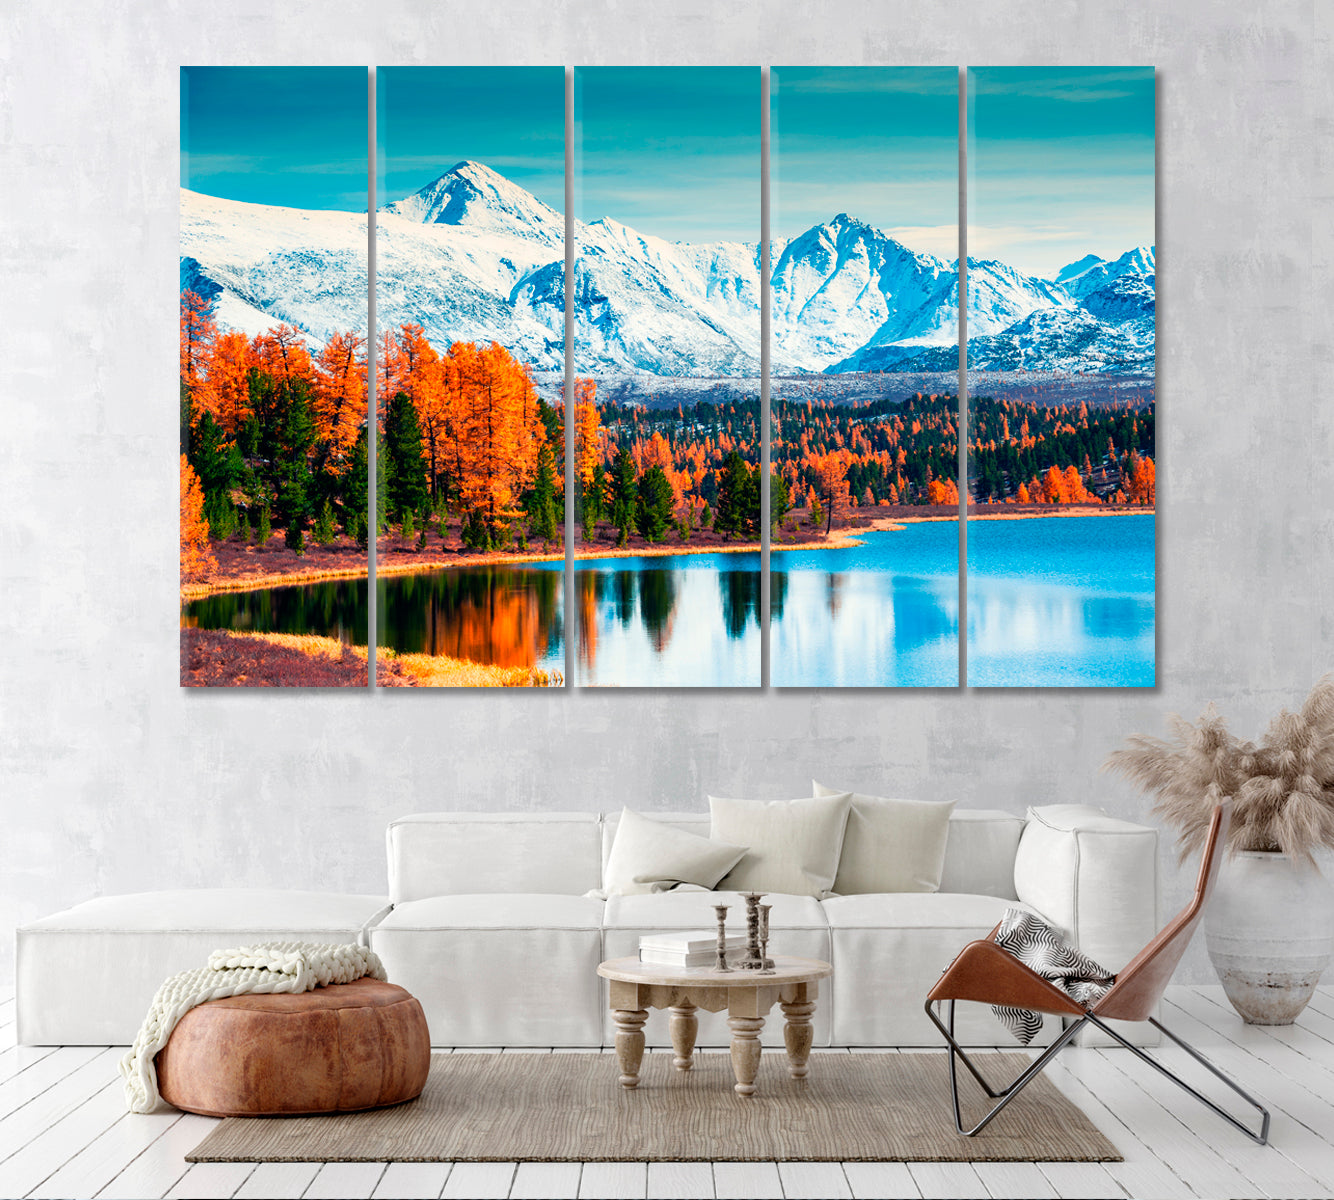 Mountains with Autumn Forest on Kidelu Lake Siberia Russia Canvas Print ArtLexy 5 Panels 36"x24" inches 